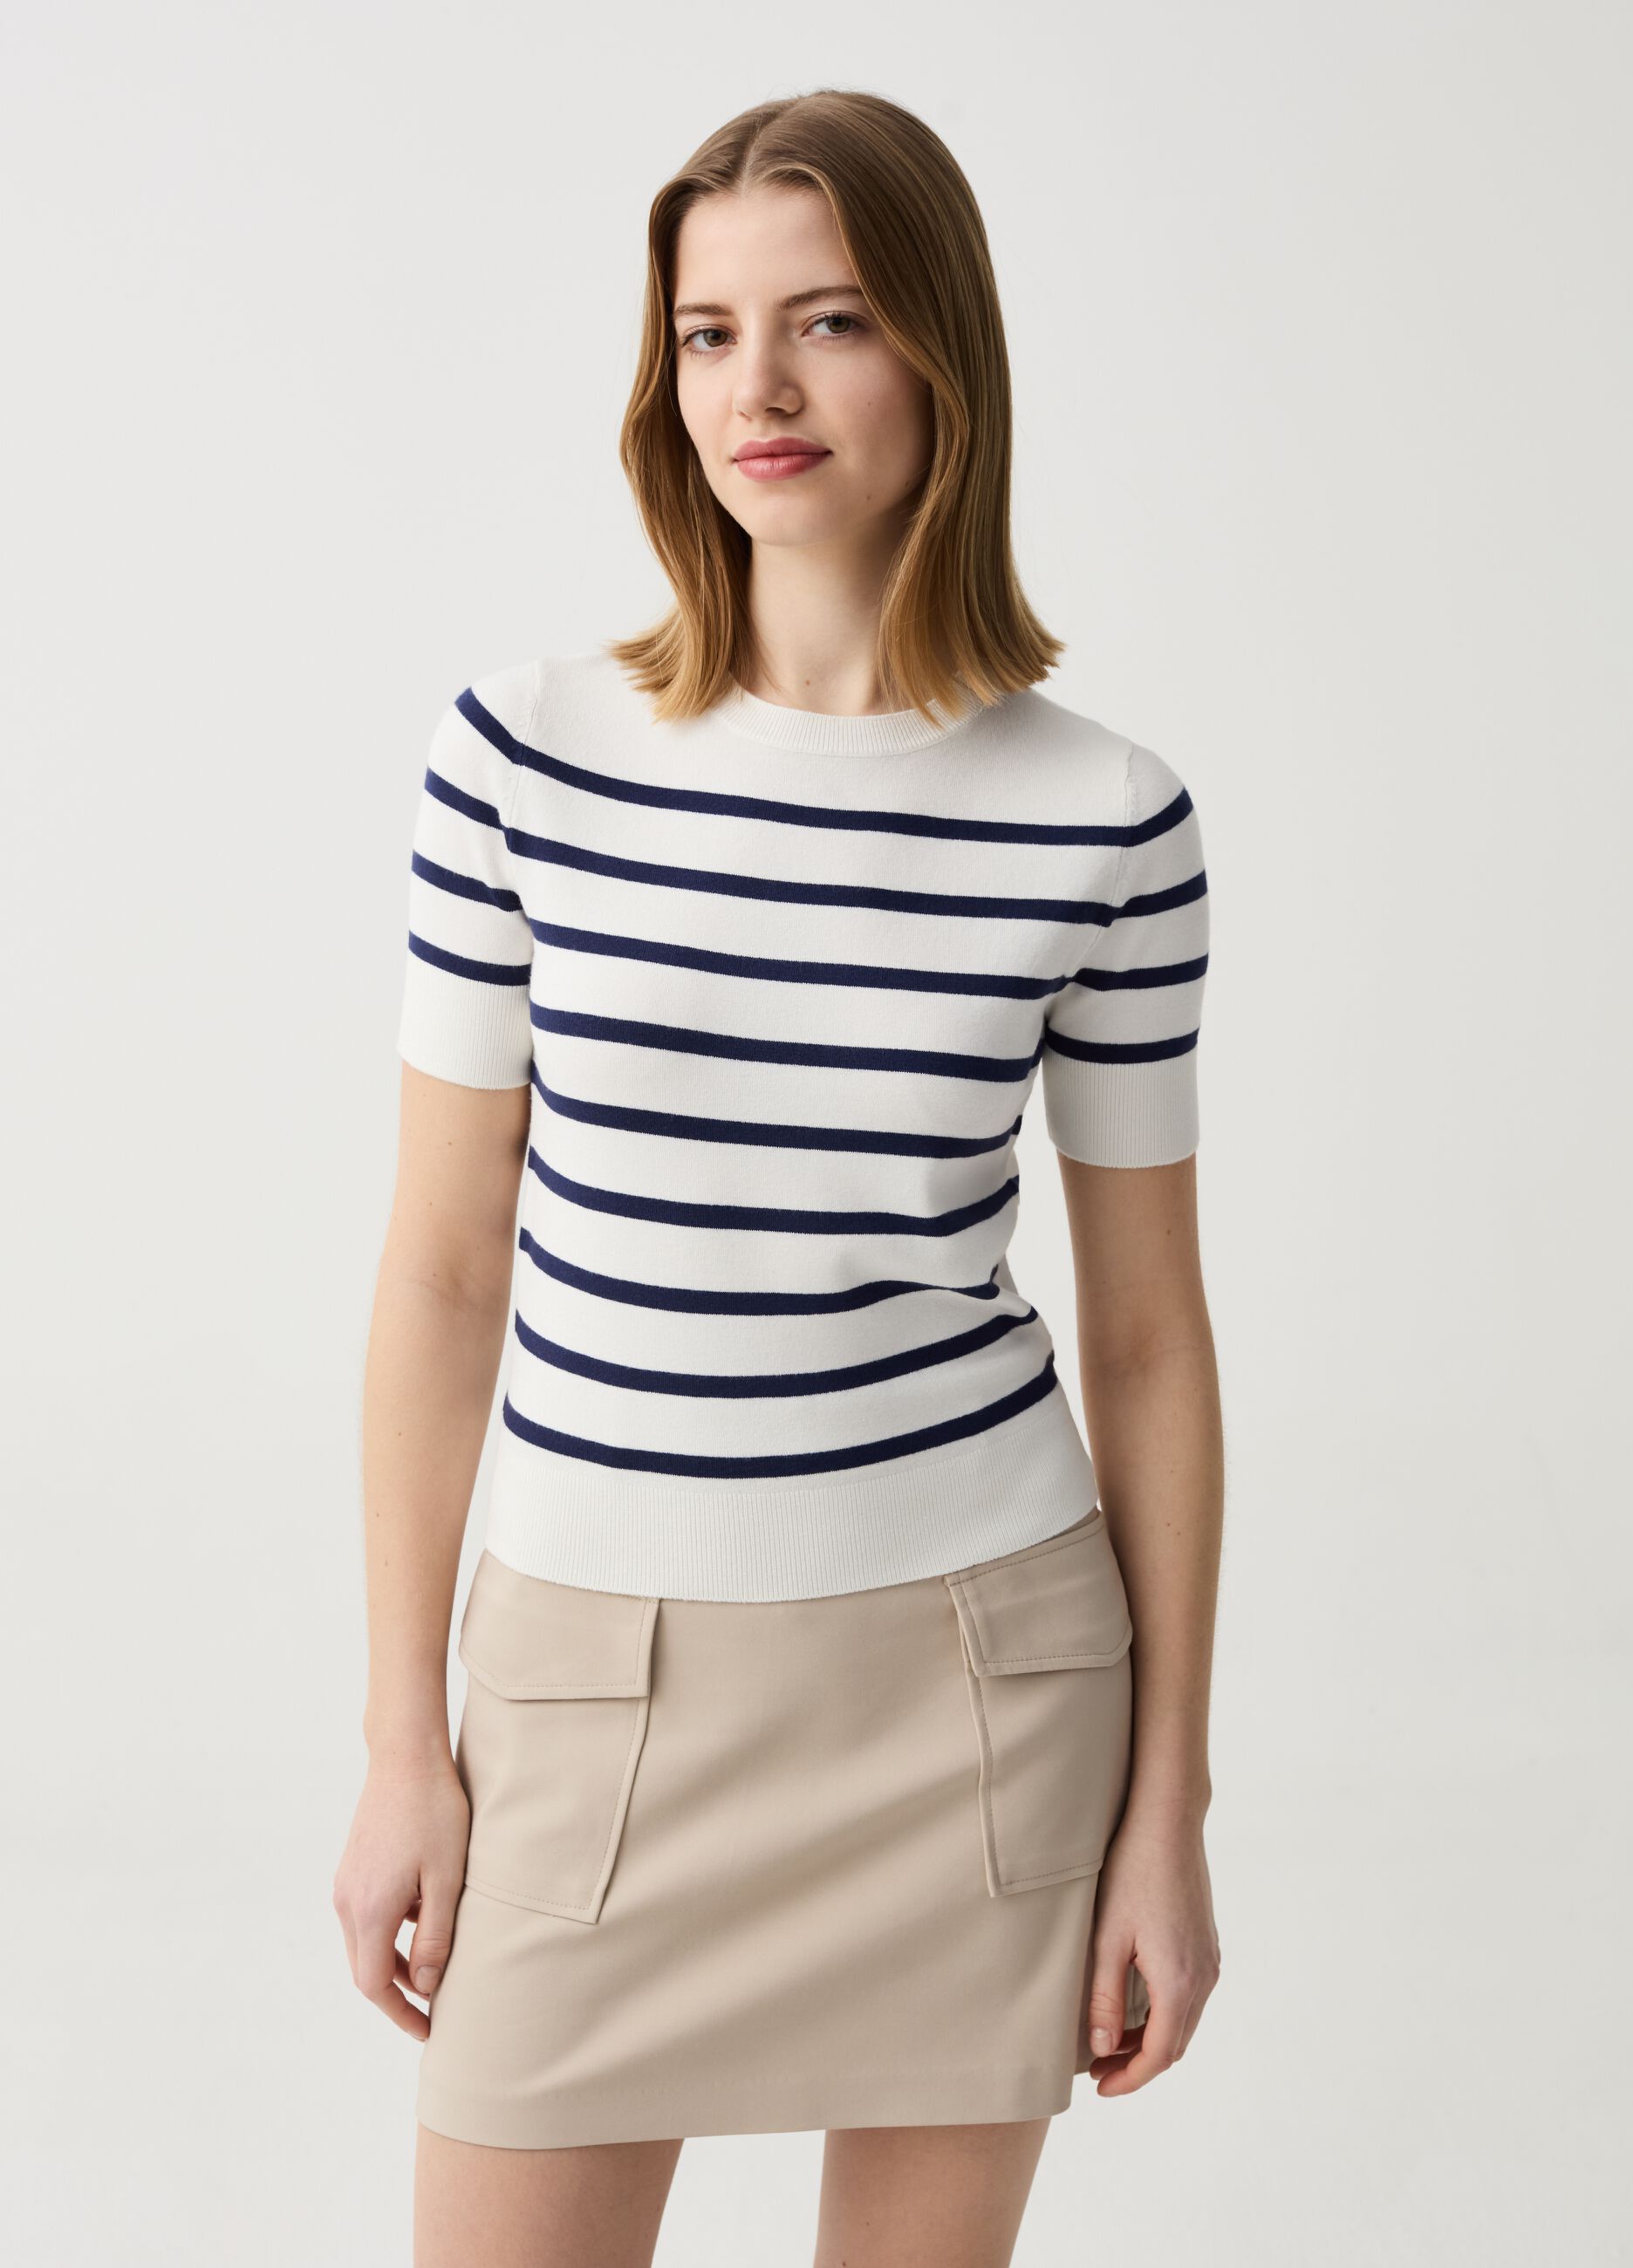 Striped top with short sleeves